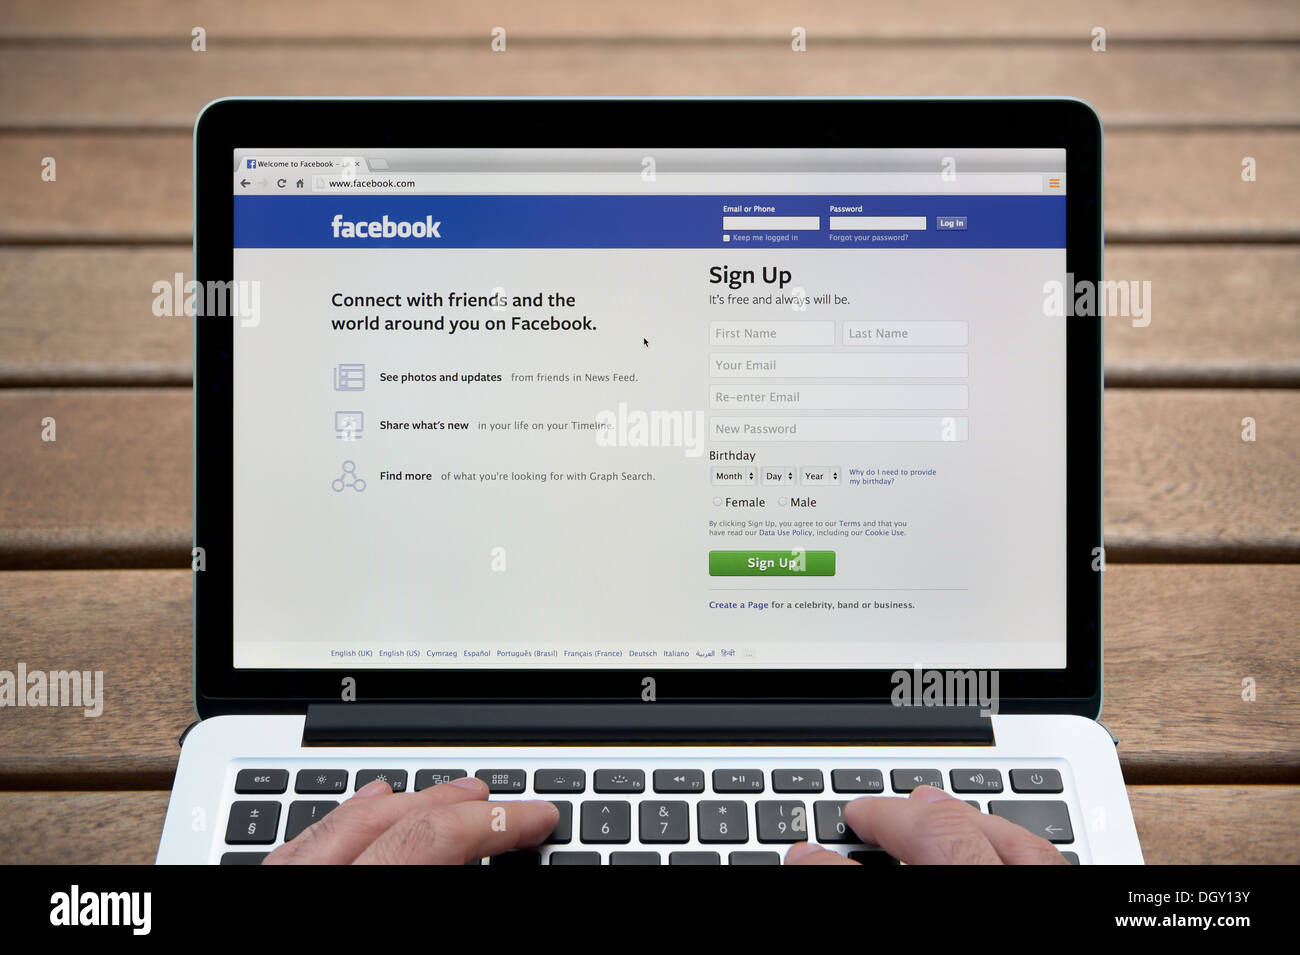 The Facebook website on a MacBook against a wooden bench outdoor background including a man's fingers (Editorial use only). Stock Photo